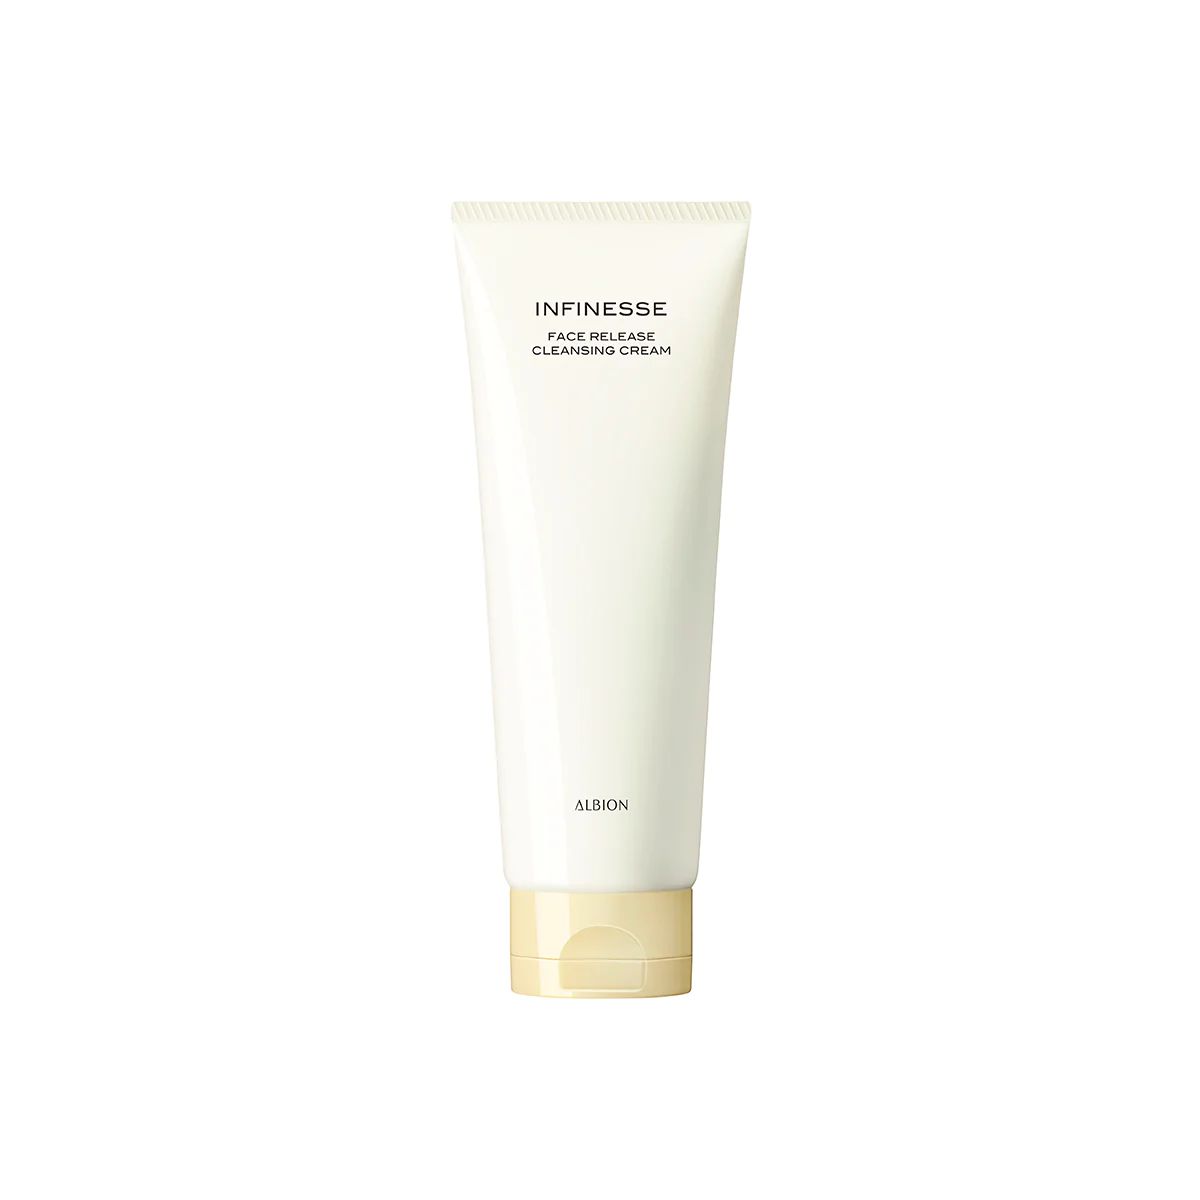 Albion INFINESSE Face Release Cleansing Cream, 170 g | ALBION US | ALBION